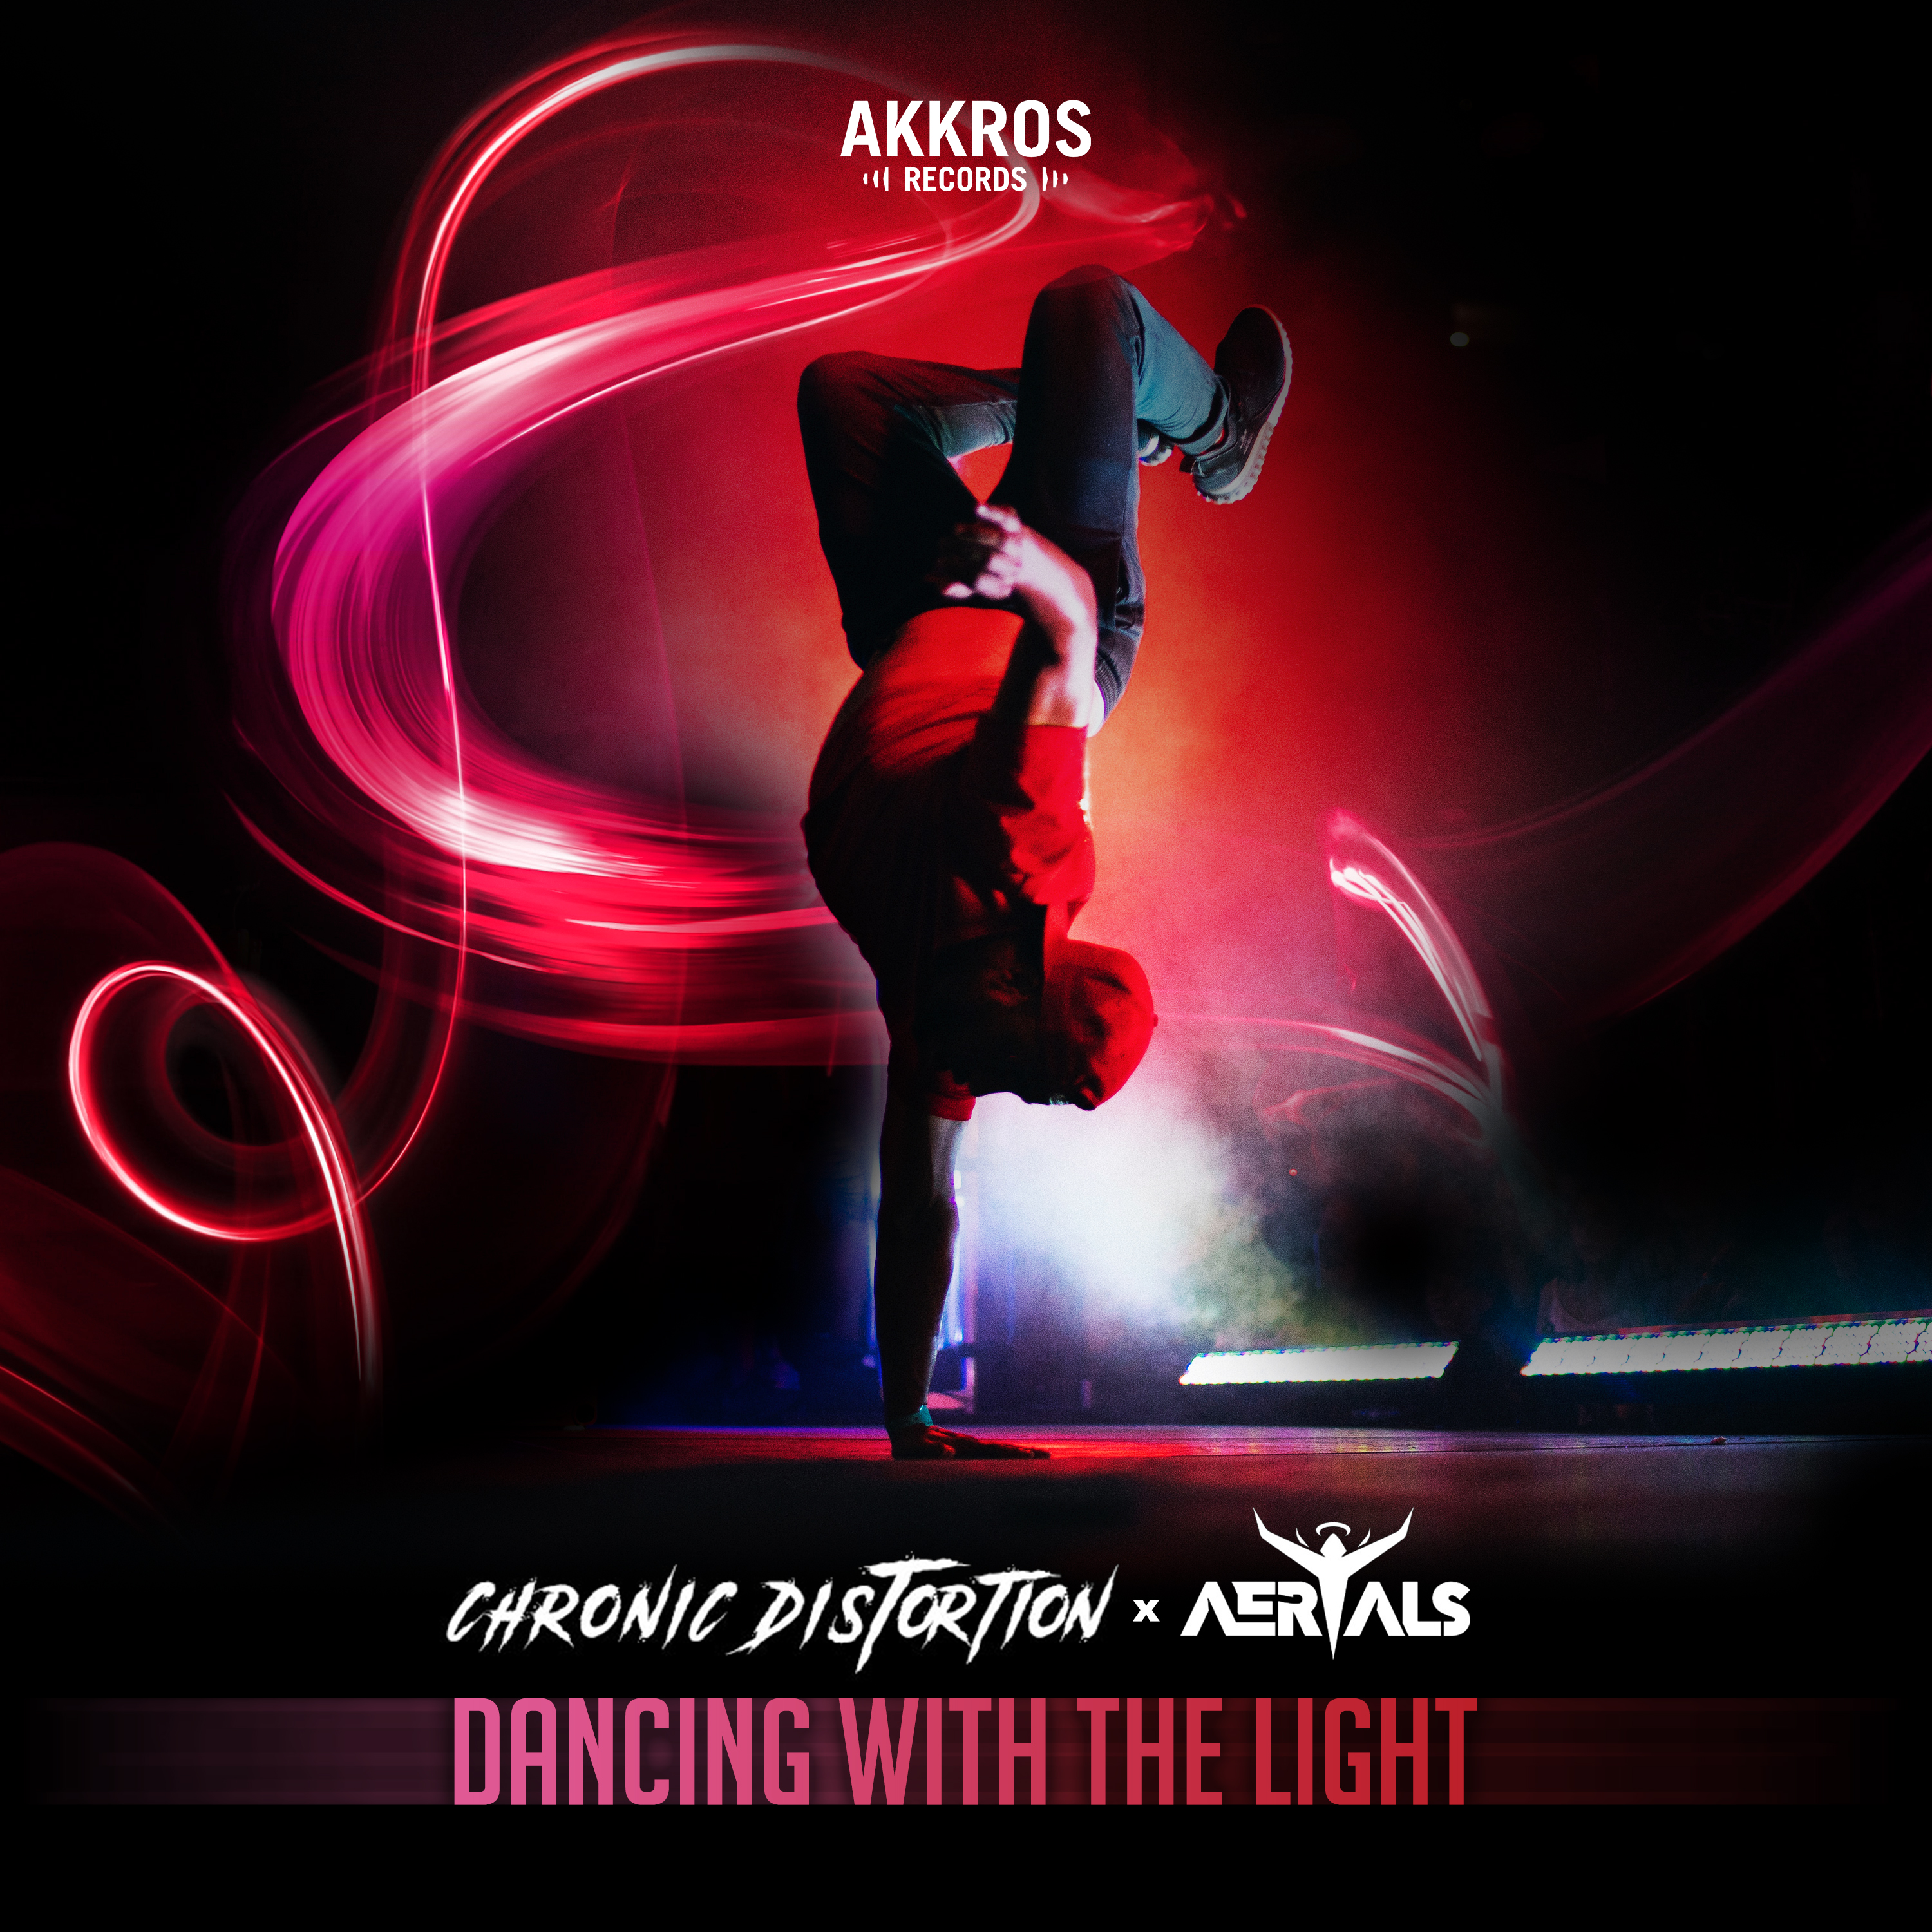 Chronic Distortion & Aerials - Dancing With The Light – Akkros Records